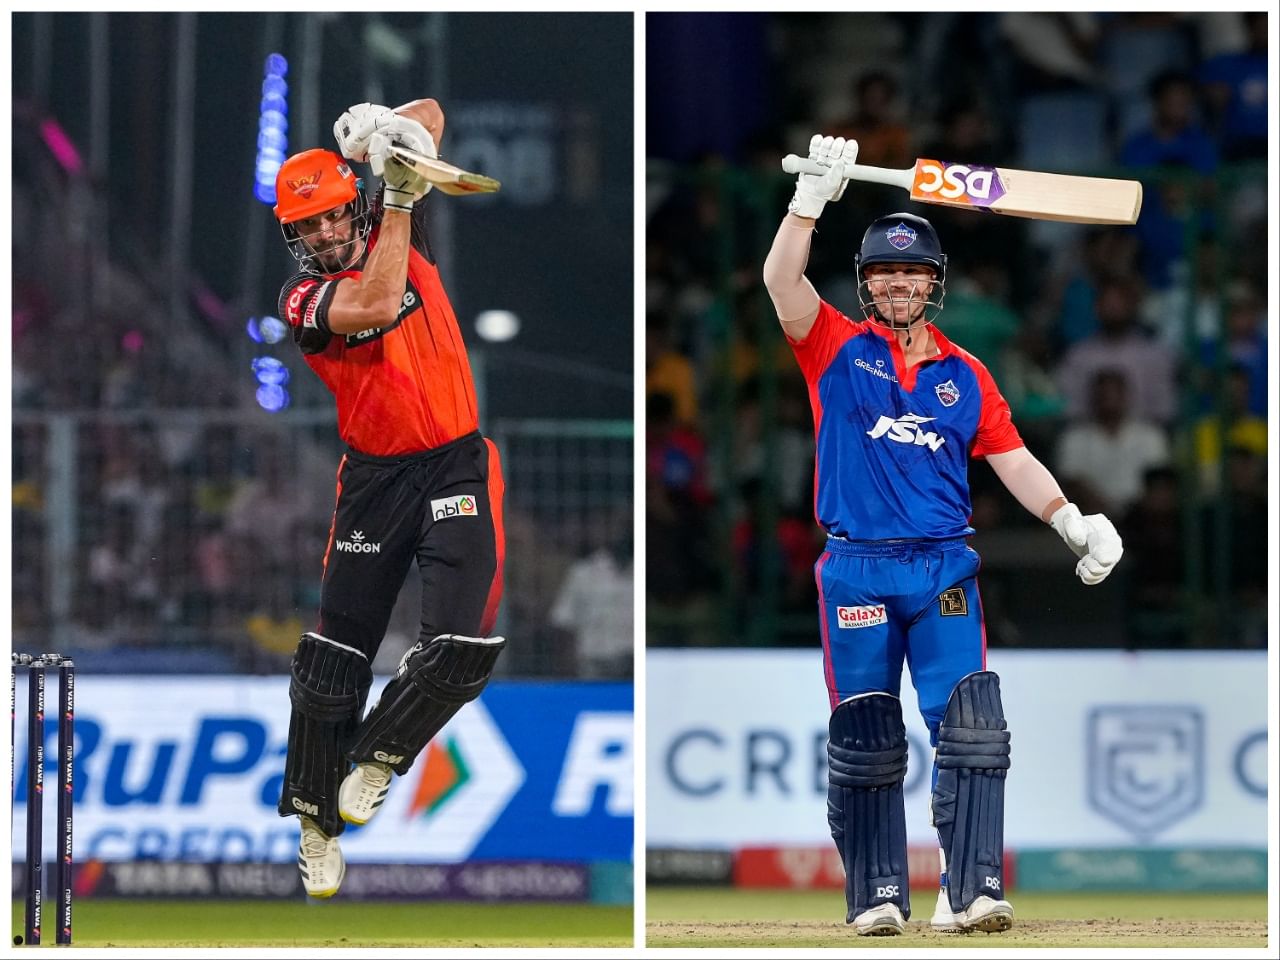 IPL 2023 DC vs SRH Live Streaming: When and where to watch Delhi Capitals vs Sunrisers Hyderabad match